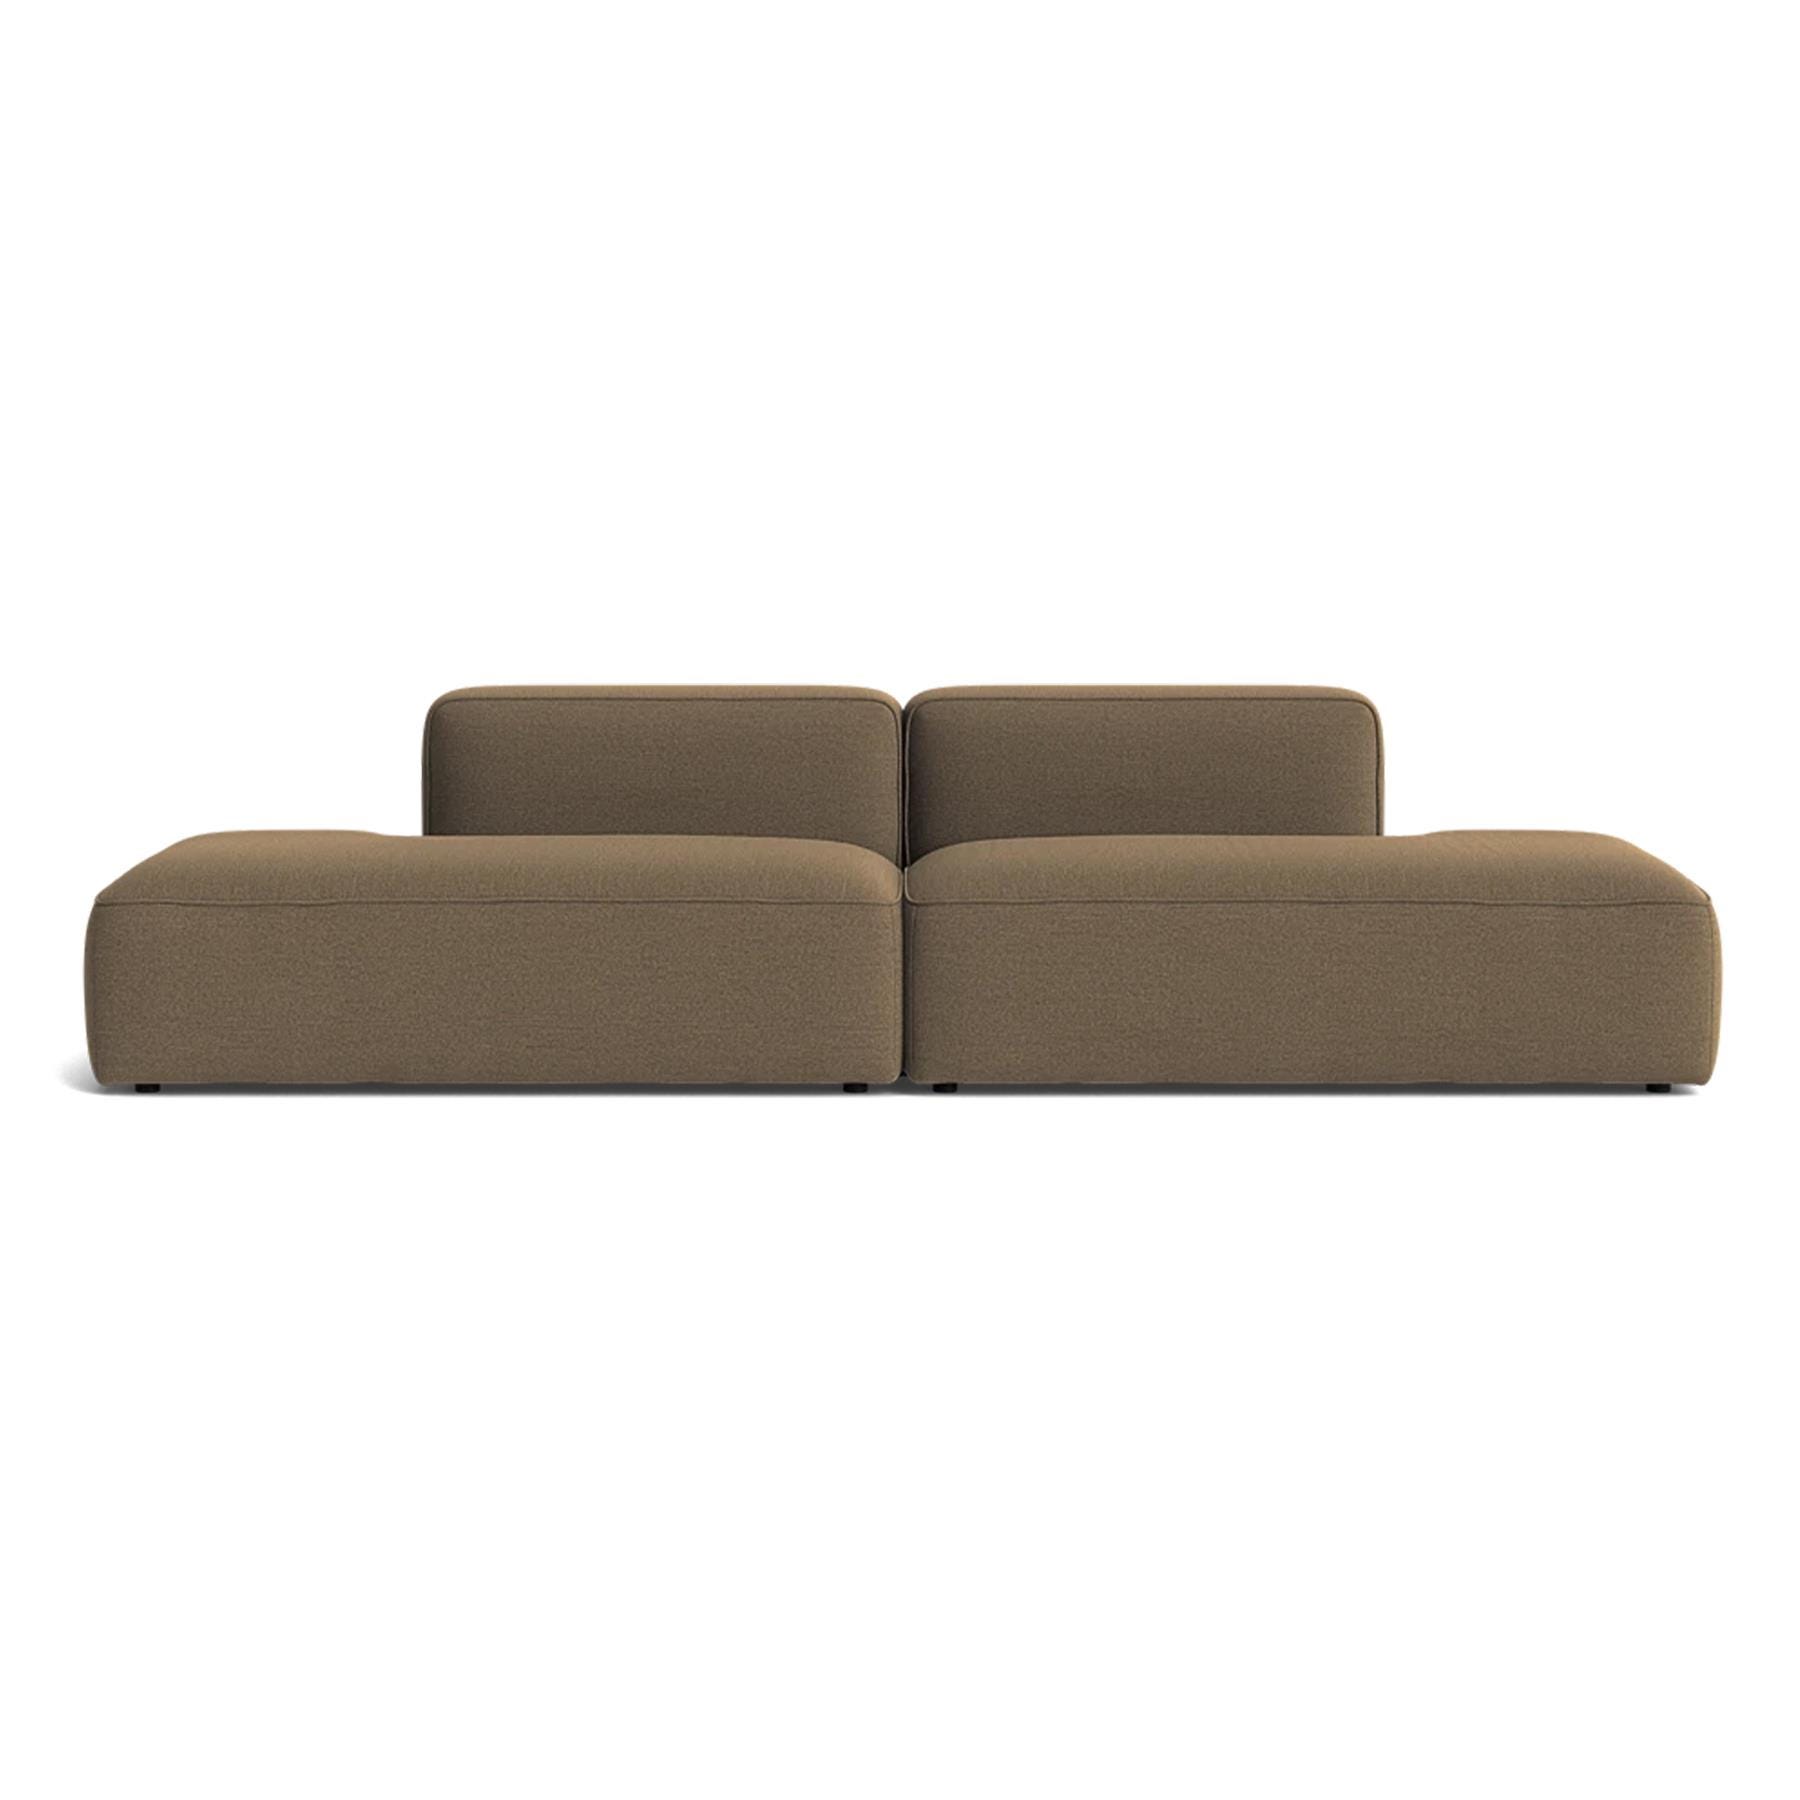 Make Nordic Basecamp Xl Sofa With 2 Open Ends Rewool 358 Brown Designer Furniture From Holloways Of Ludlow